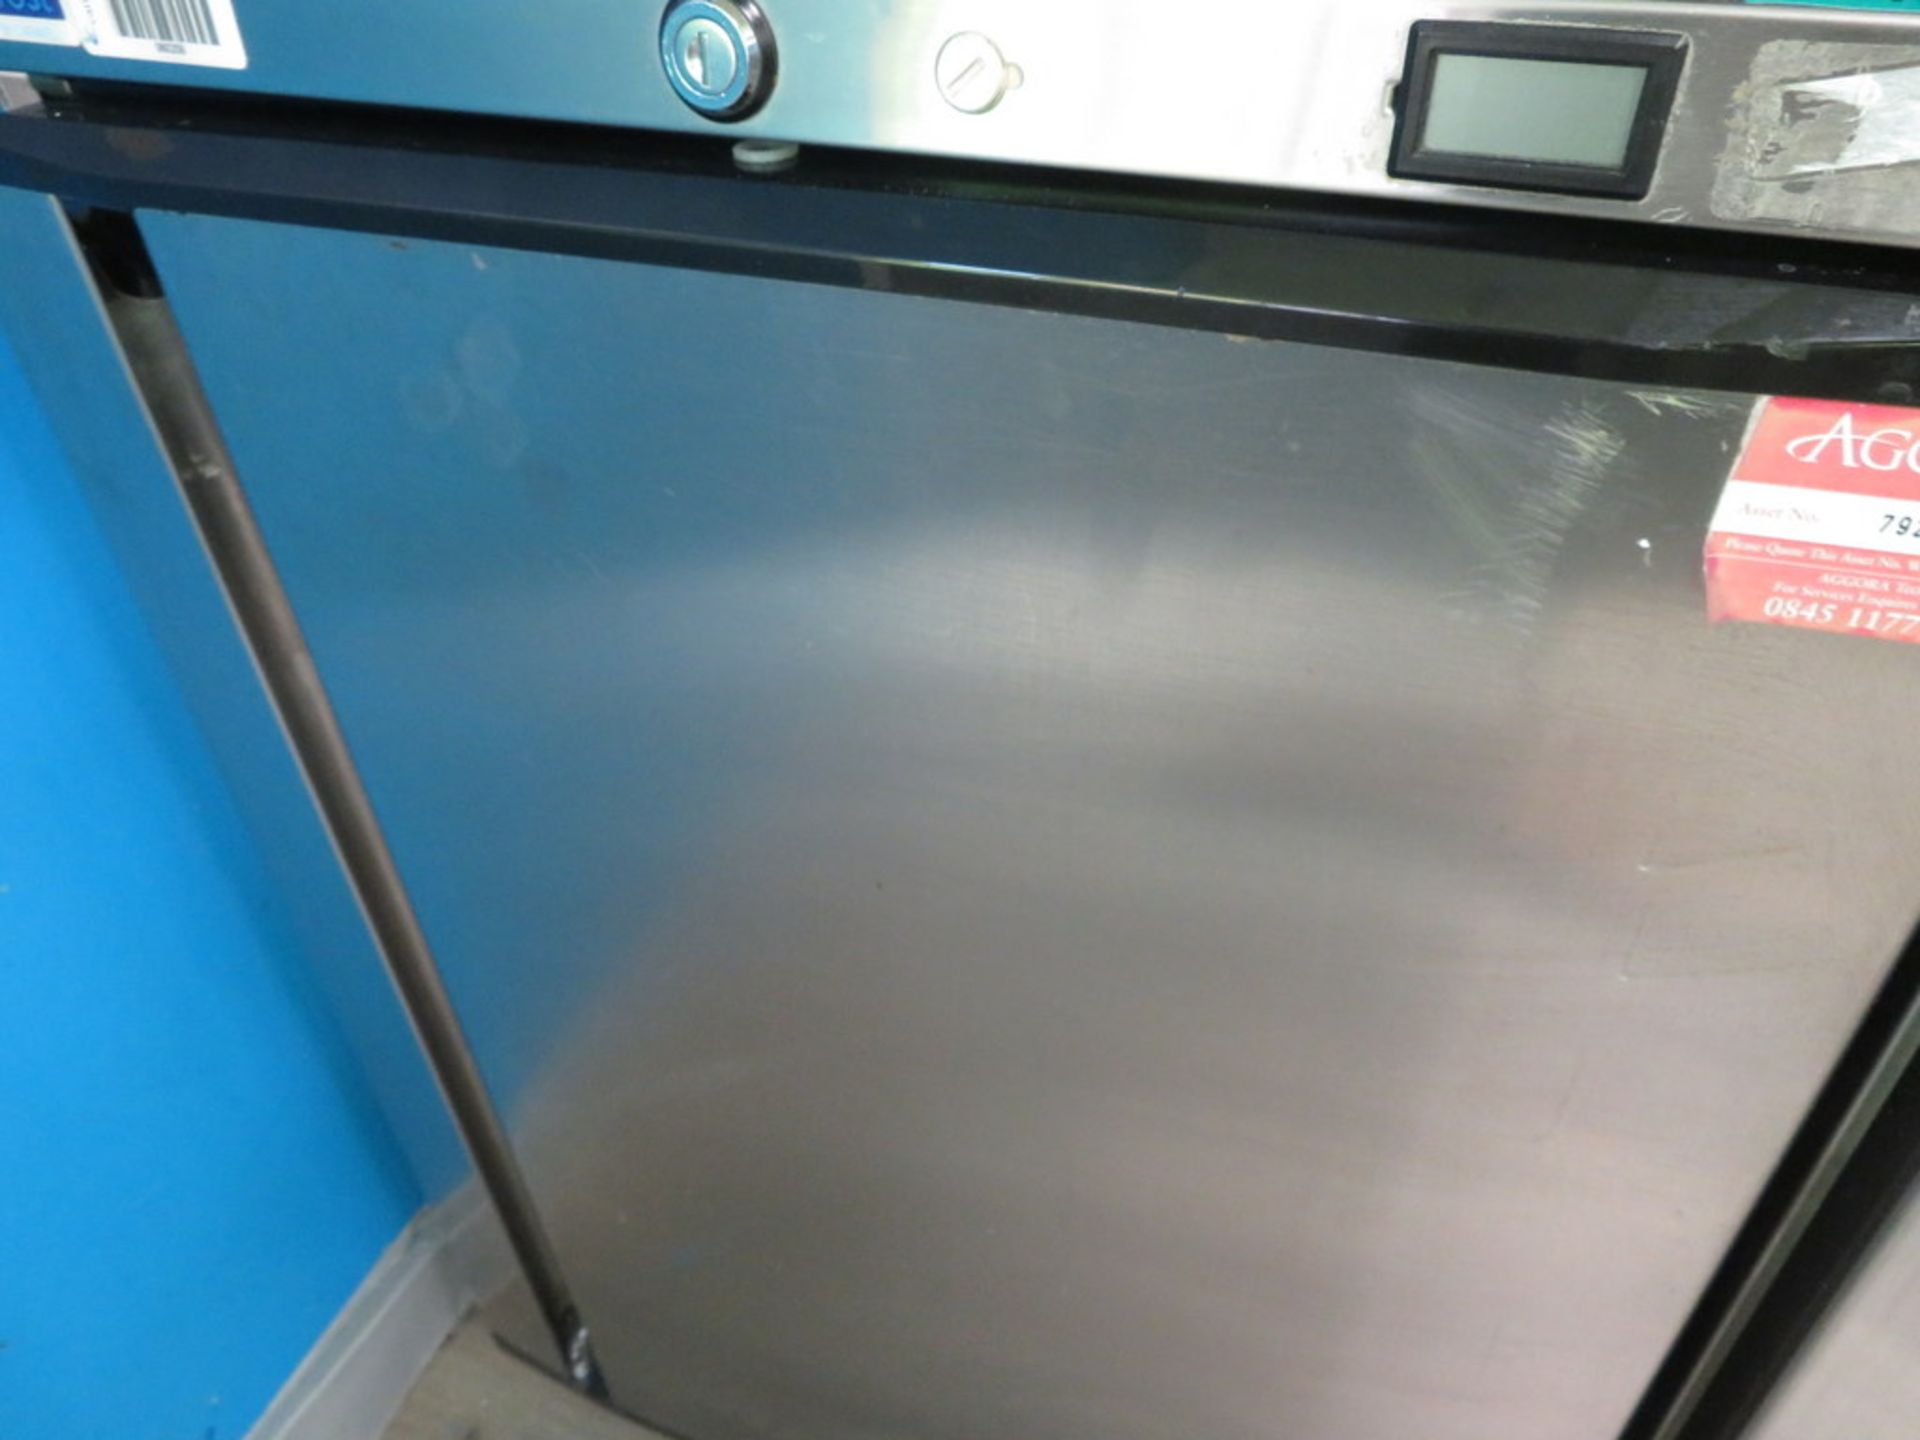 Scan Frost SSC162S Undercounter Fridge - Image 3 of 4